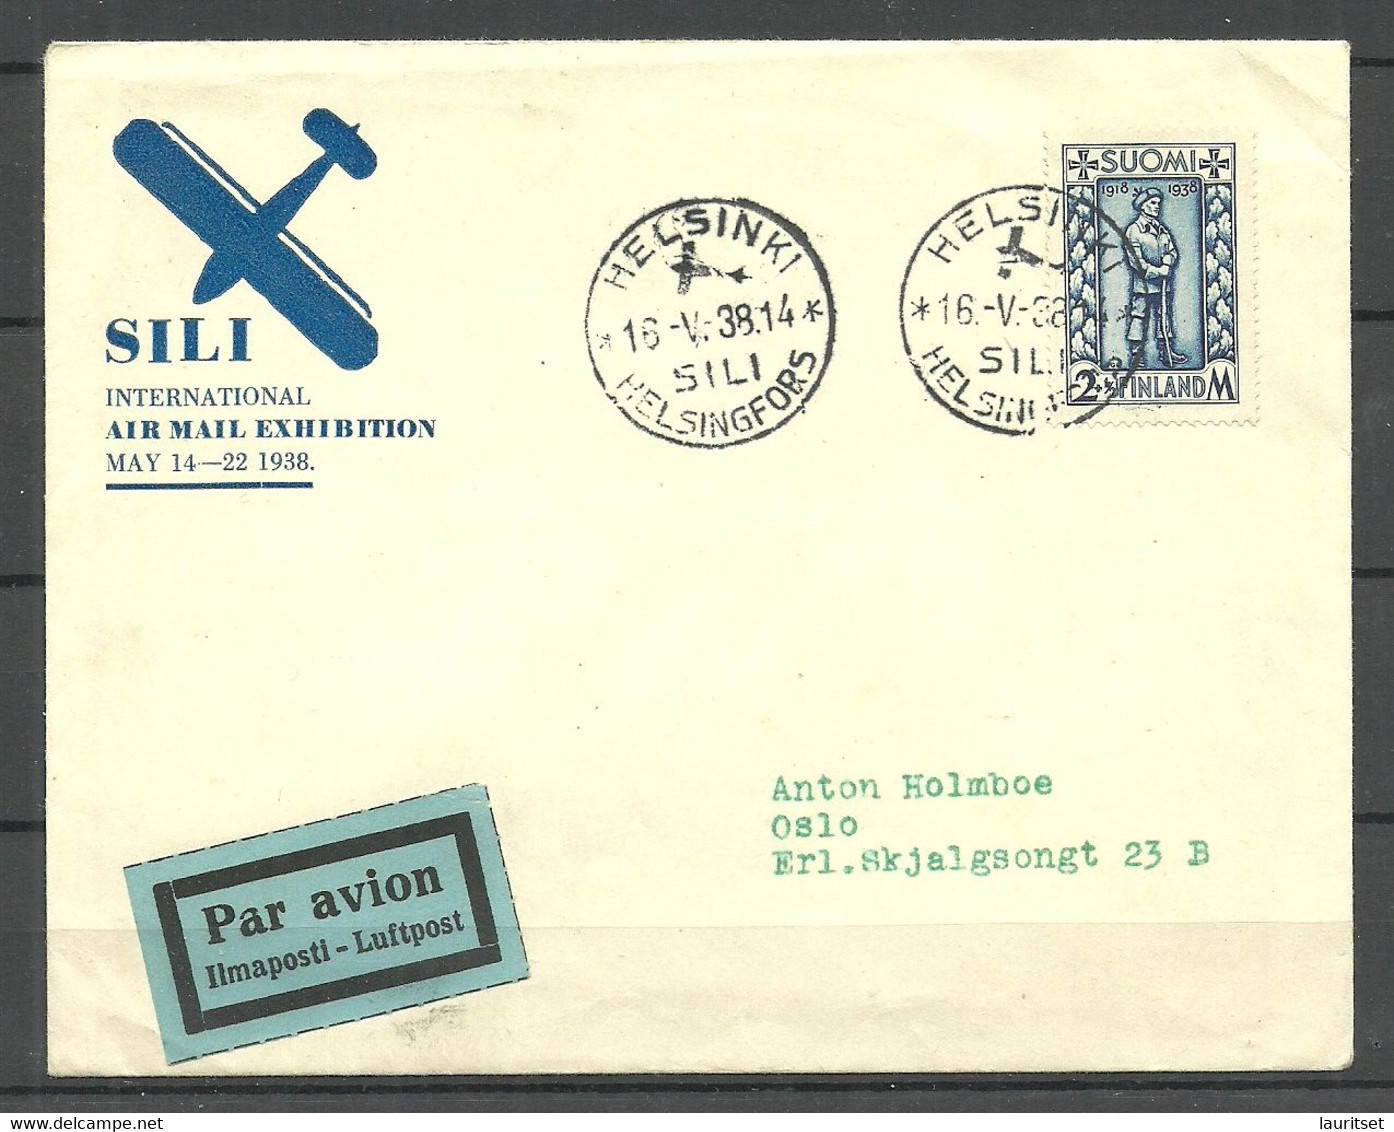 FINLAND 1939 Illustrated Cover SILI International Air Mail Exhibition Flugpost Air Plane Michel 211 As Single FDC? - Covers & Documents